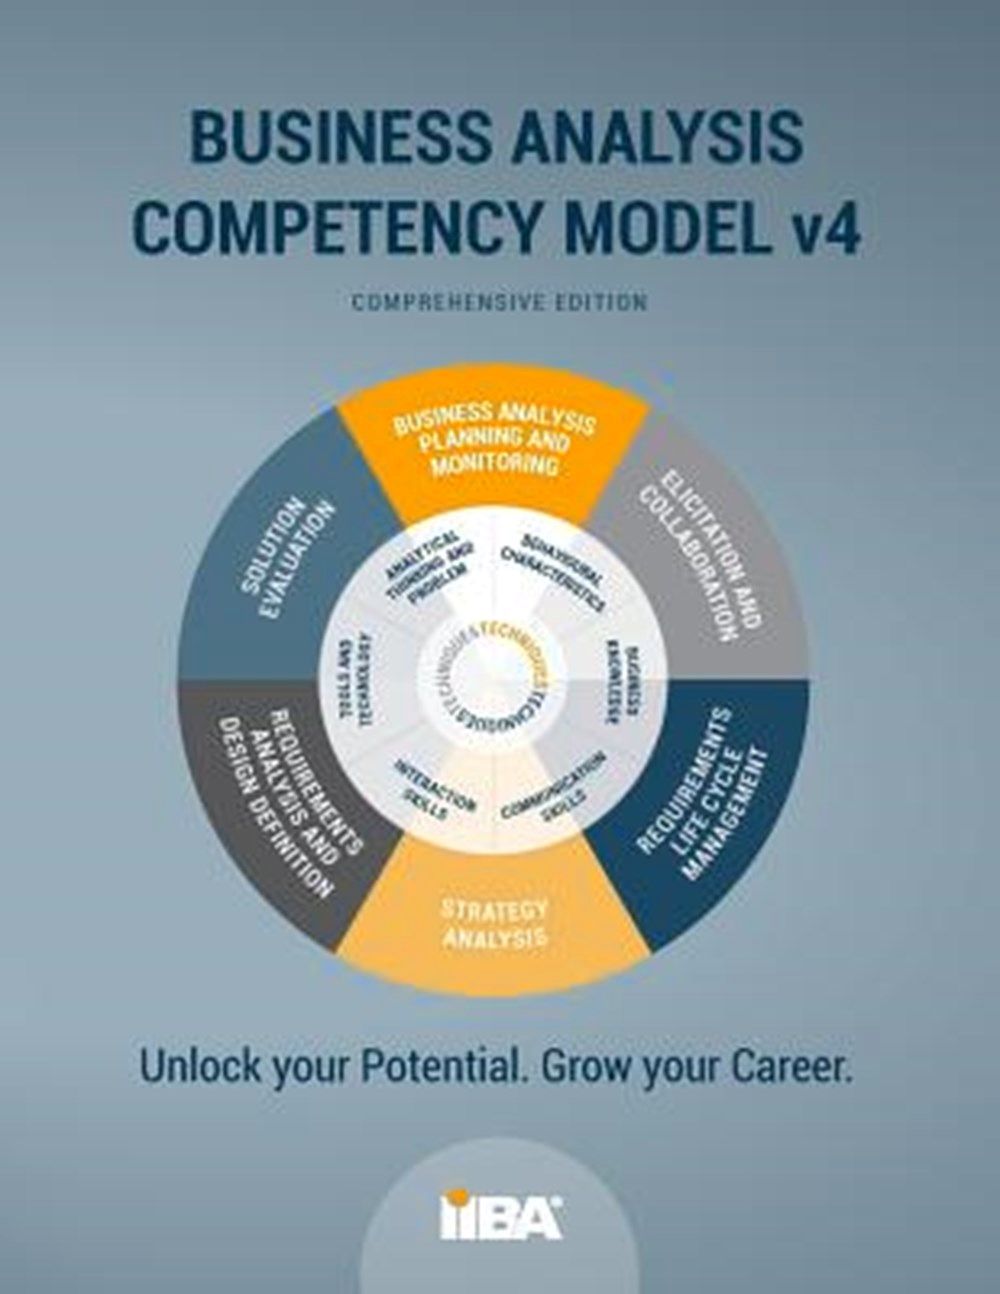 Buy the business analysis competency model